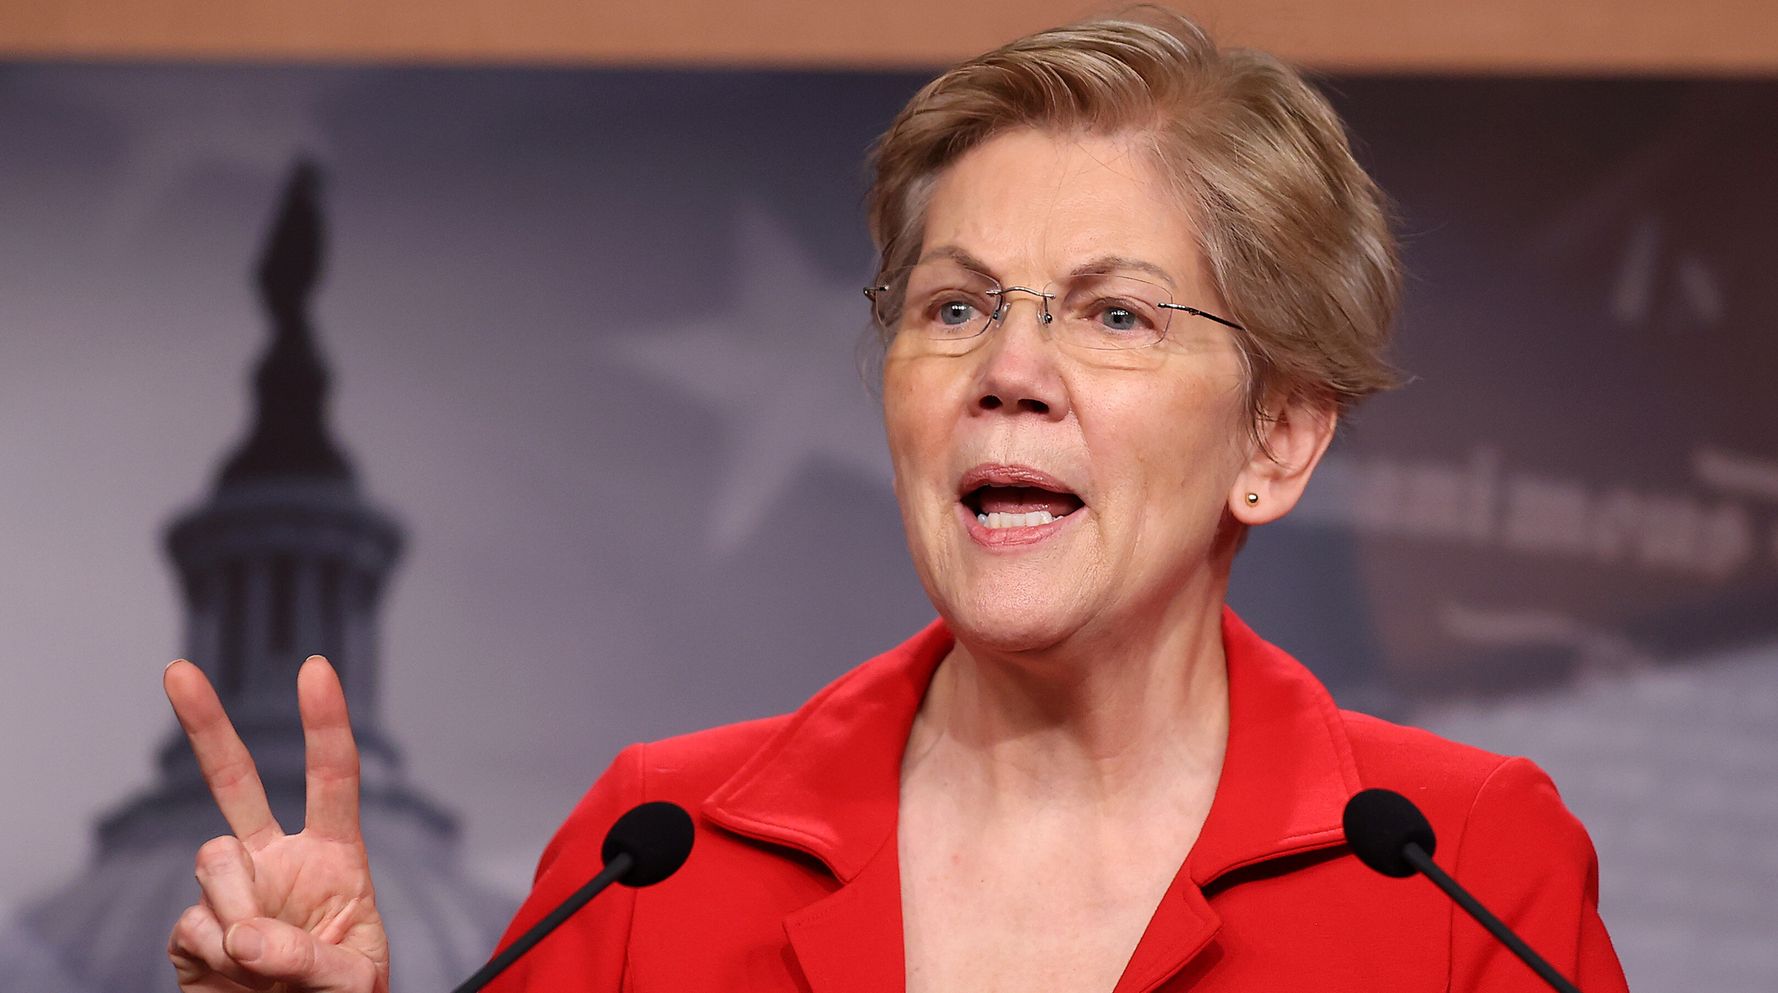 Elizabeth Warren Sums Up The GOP With ‘Poisonous’ Meal Analogy